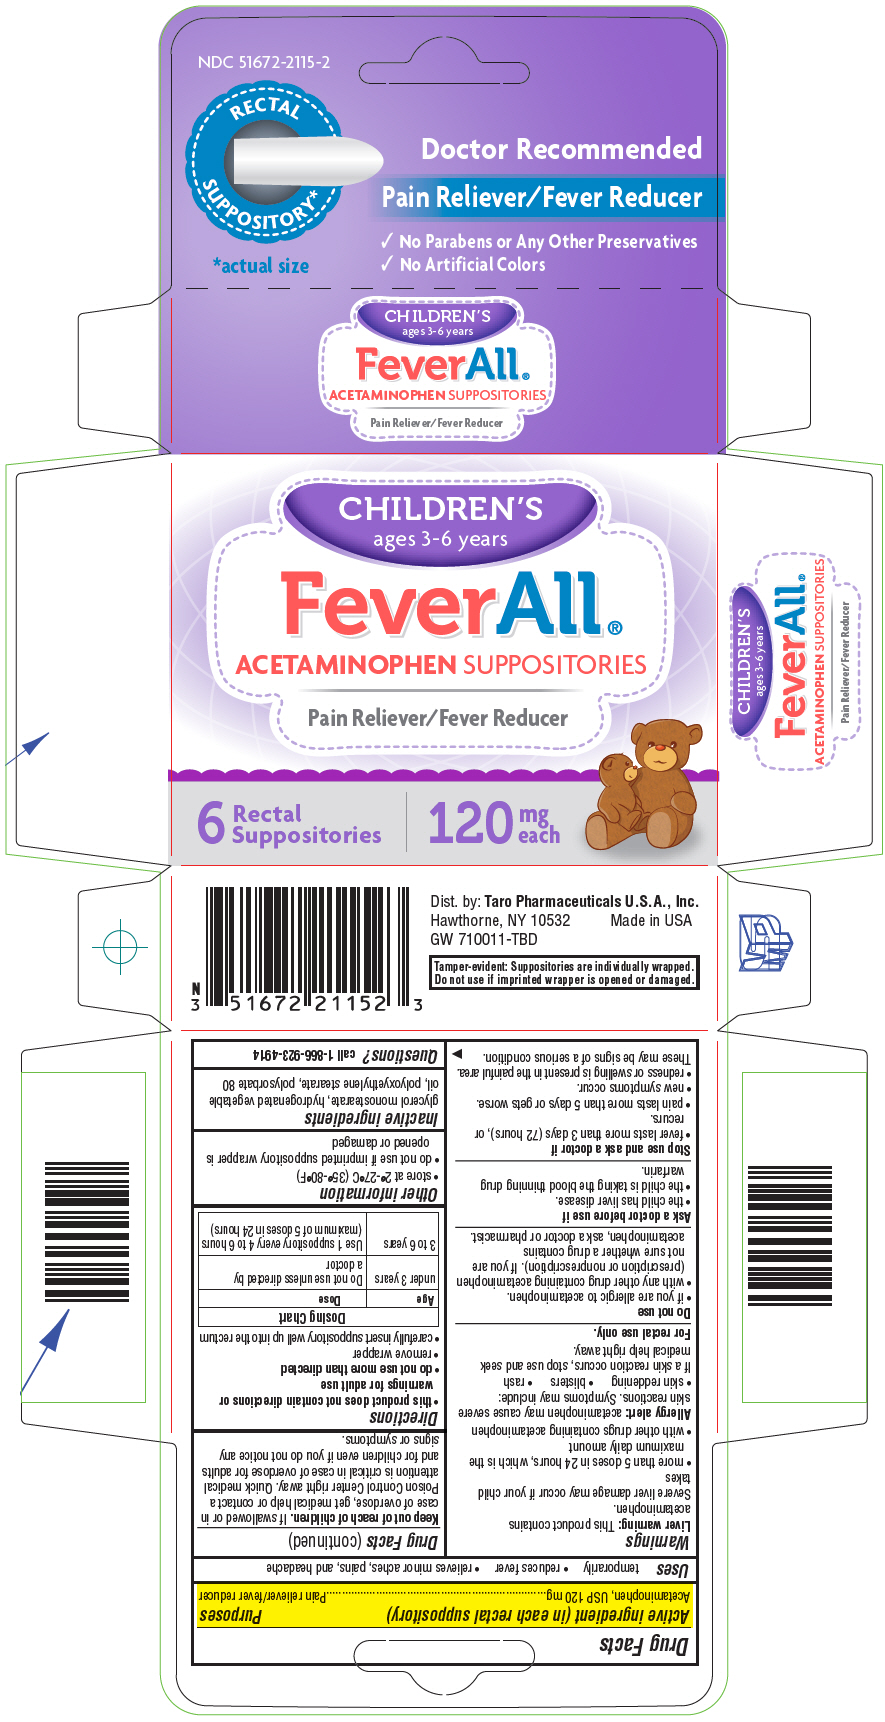 Feverall Childrens | Acetaminophen Suppository while Breastfeeding